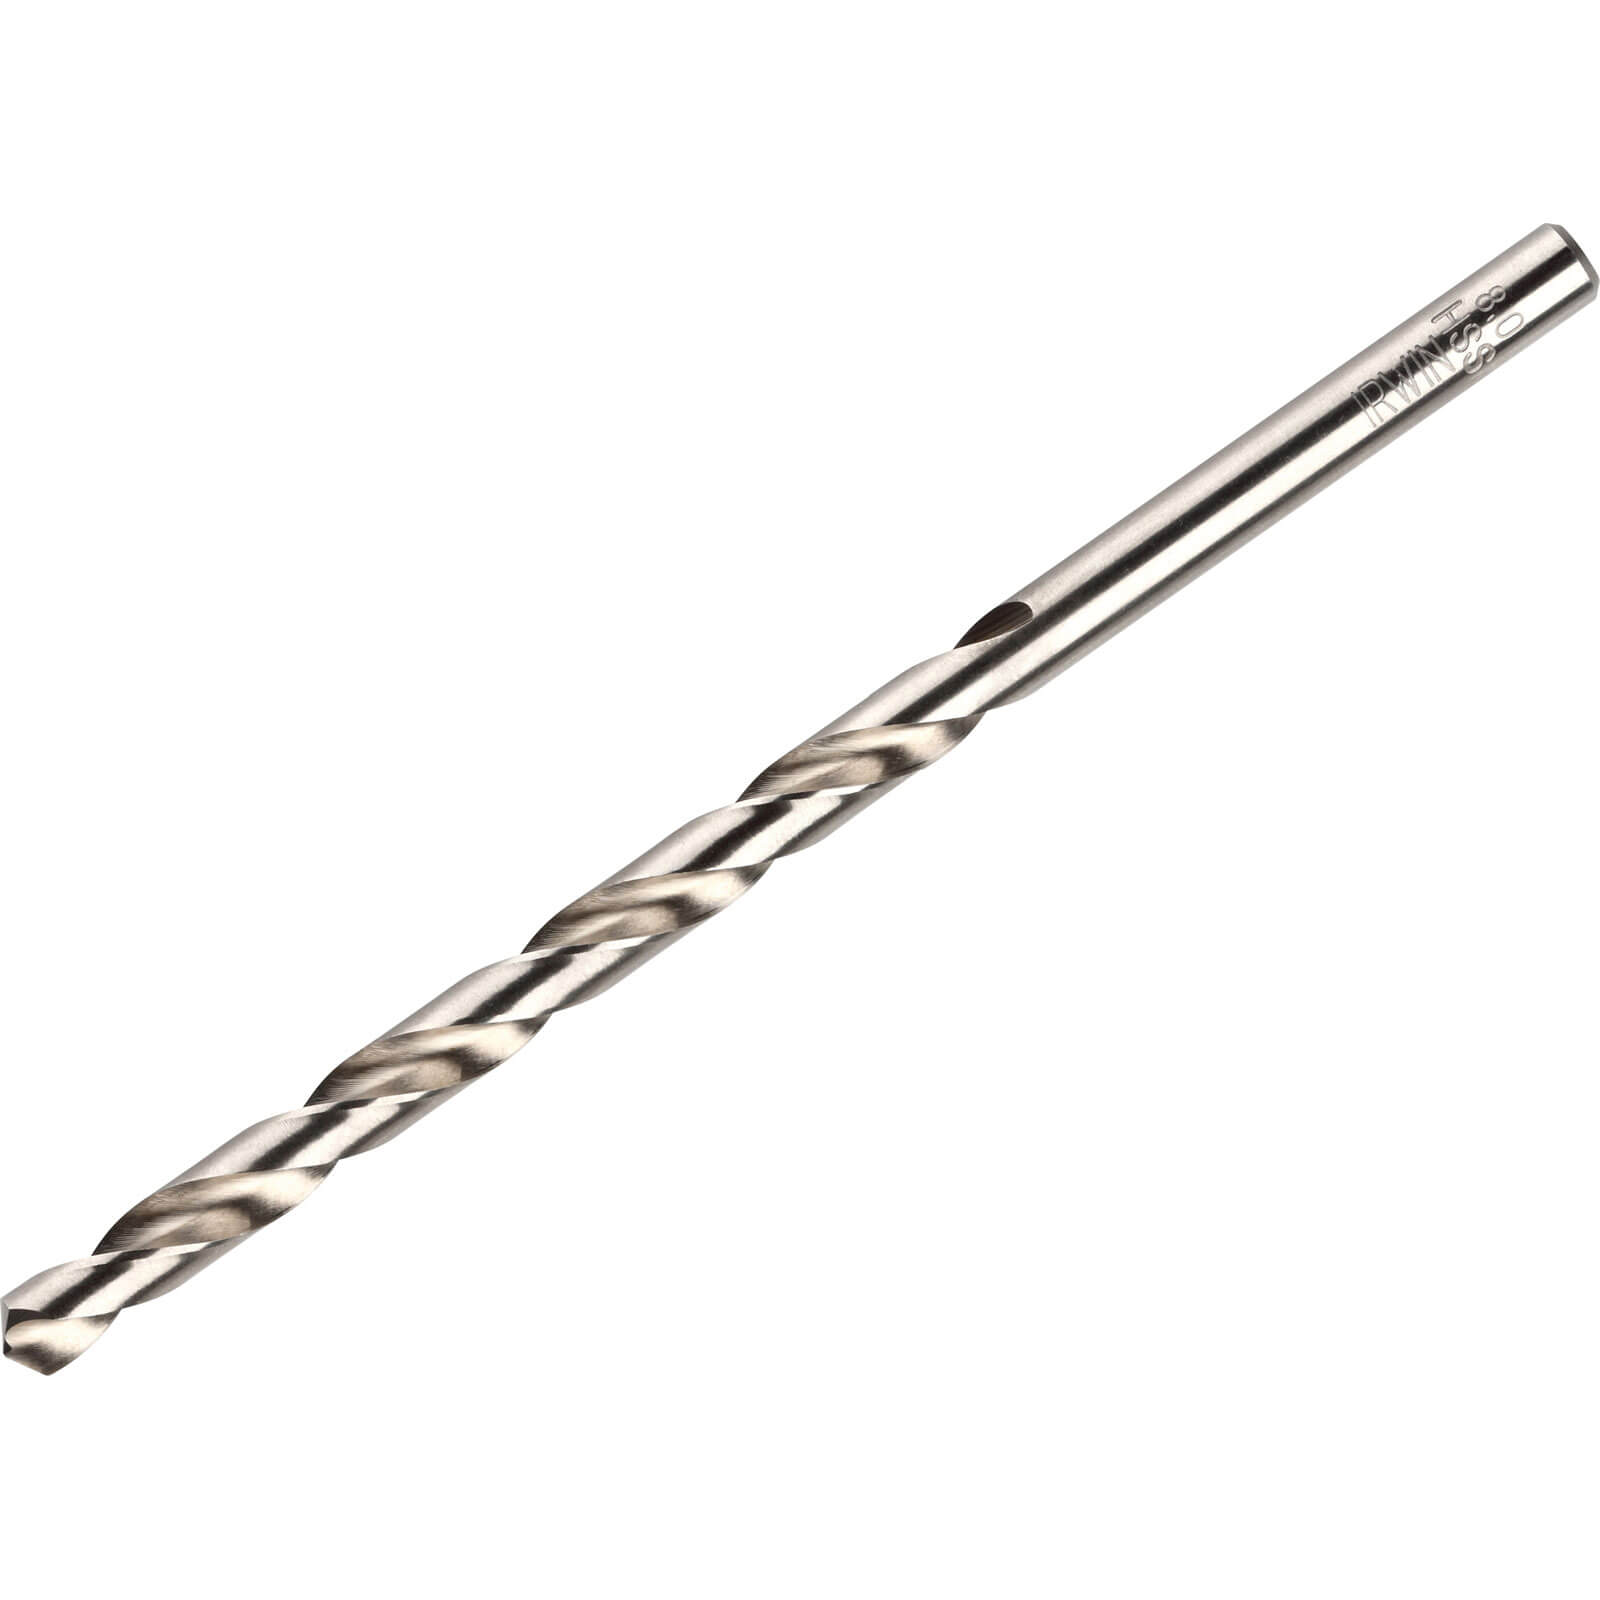 Image of Irwin HSS Pro Drill Bits 12.5mm Pack of 5